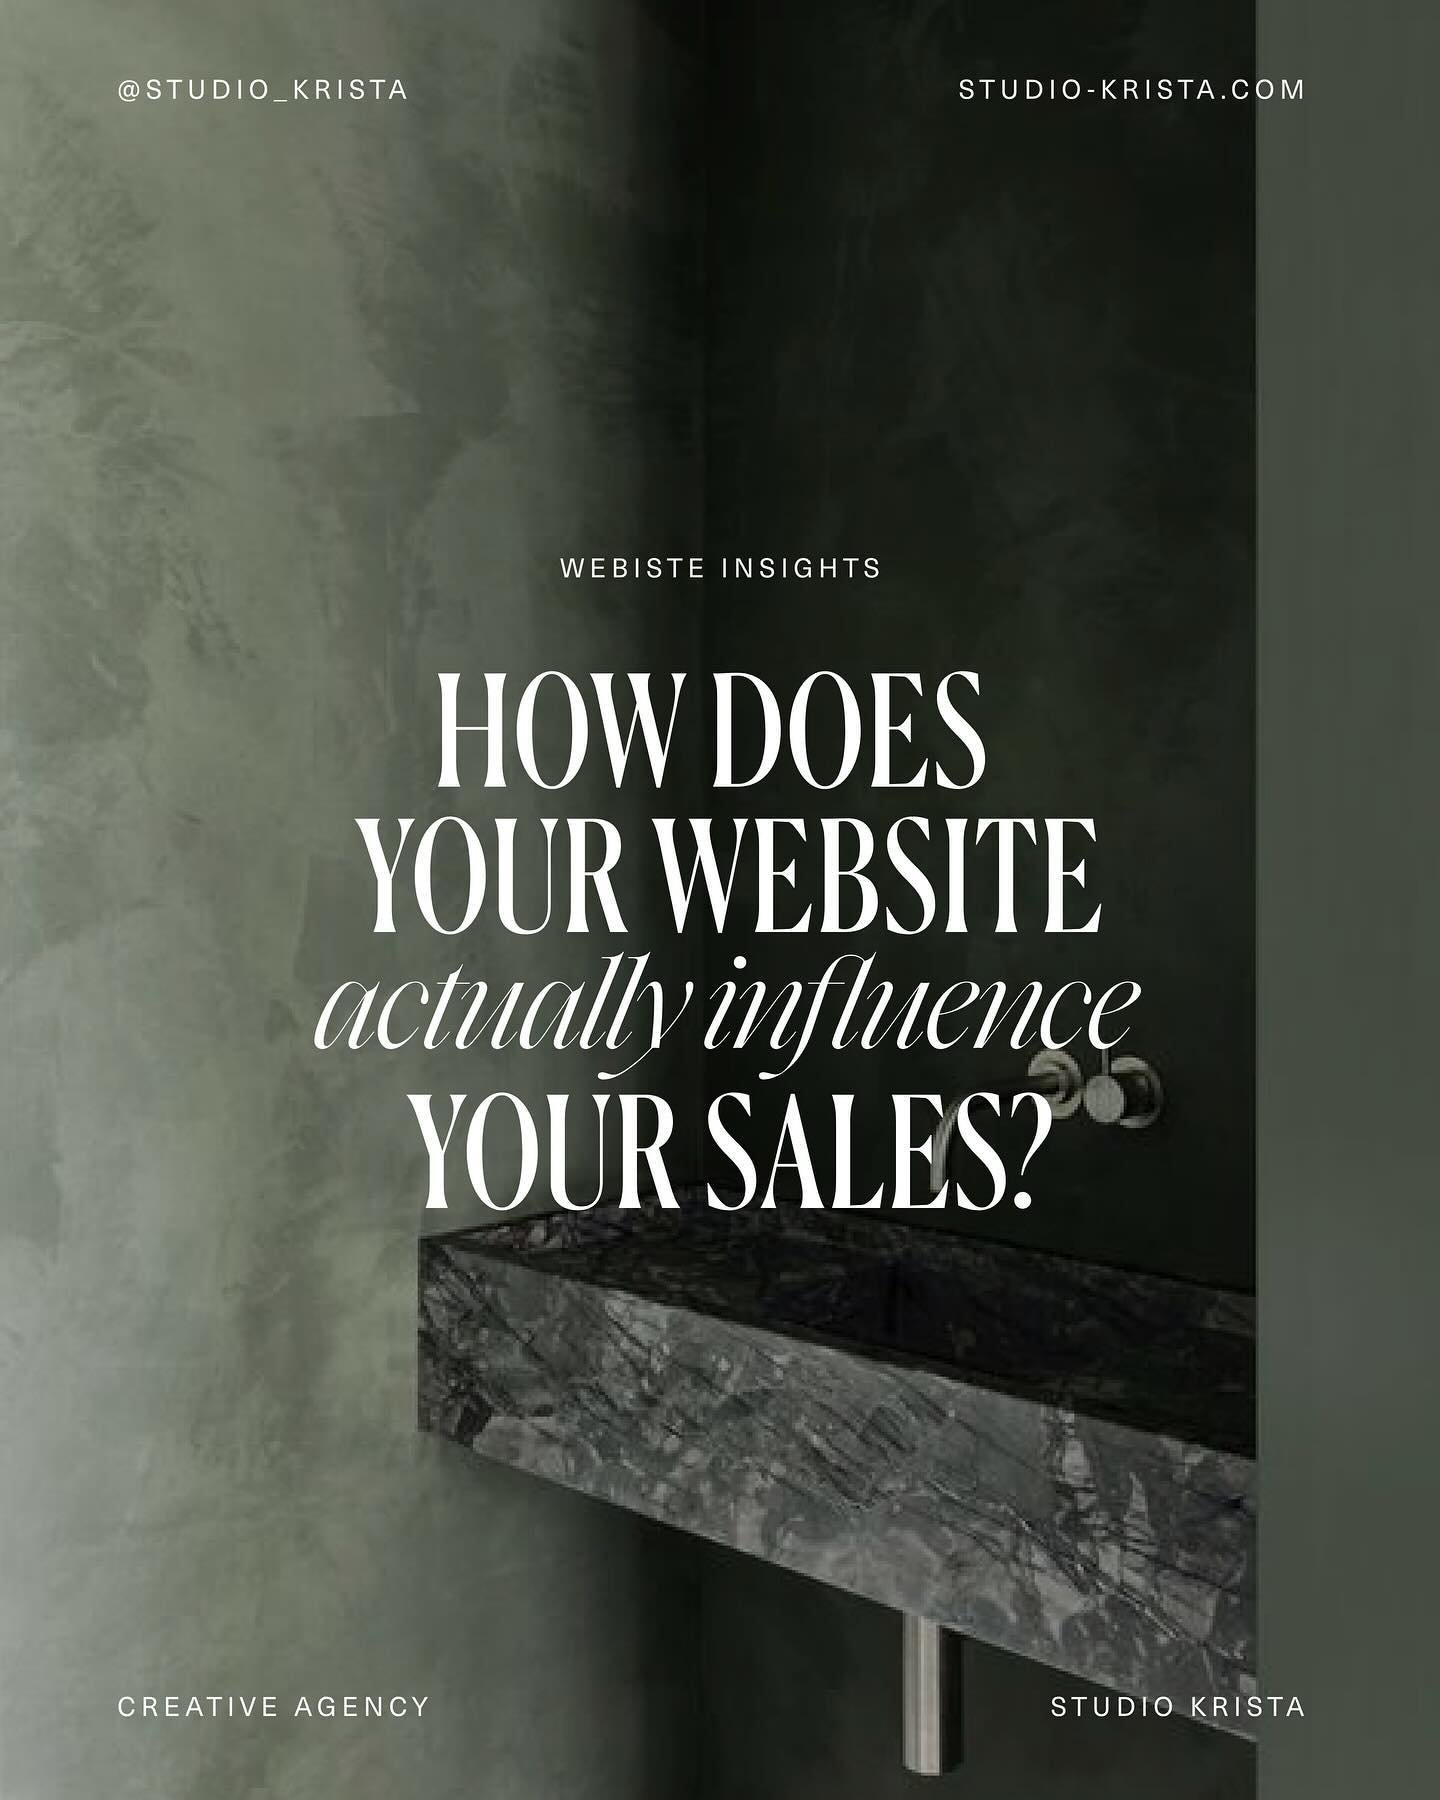 Ever wondered about your website&rsquo;s role in influencing sales? 💻💫

Here&rsquo;s how it impacts your business:

- First Impressions: Your website is often the first point of contact for potential customers, shaping their initial perception of y